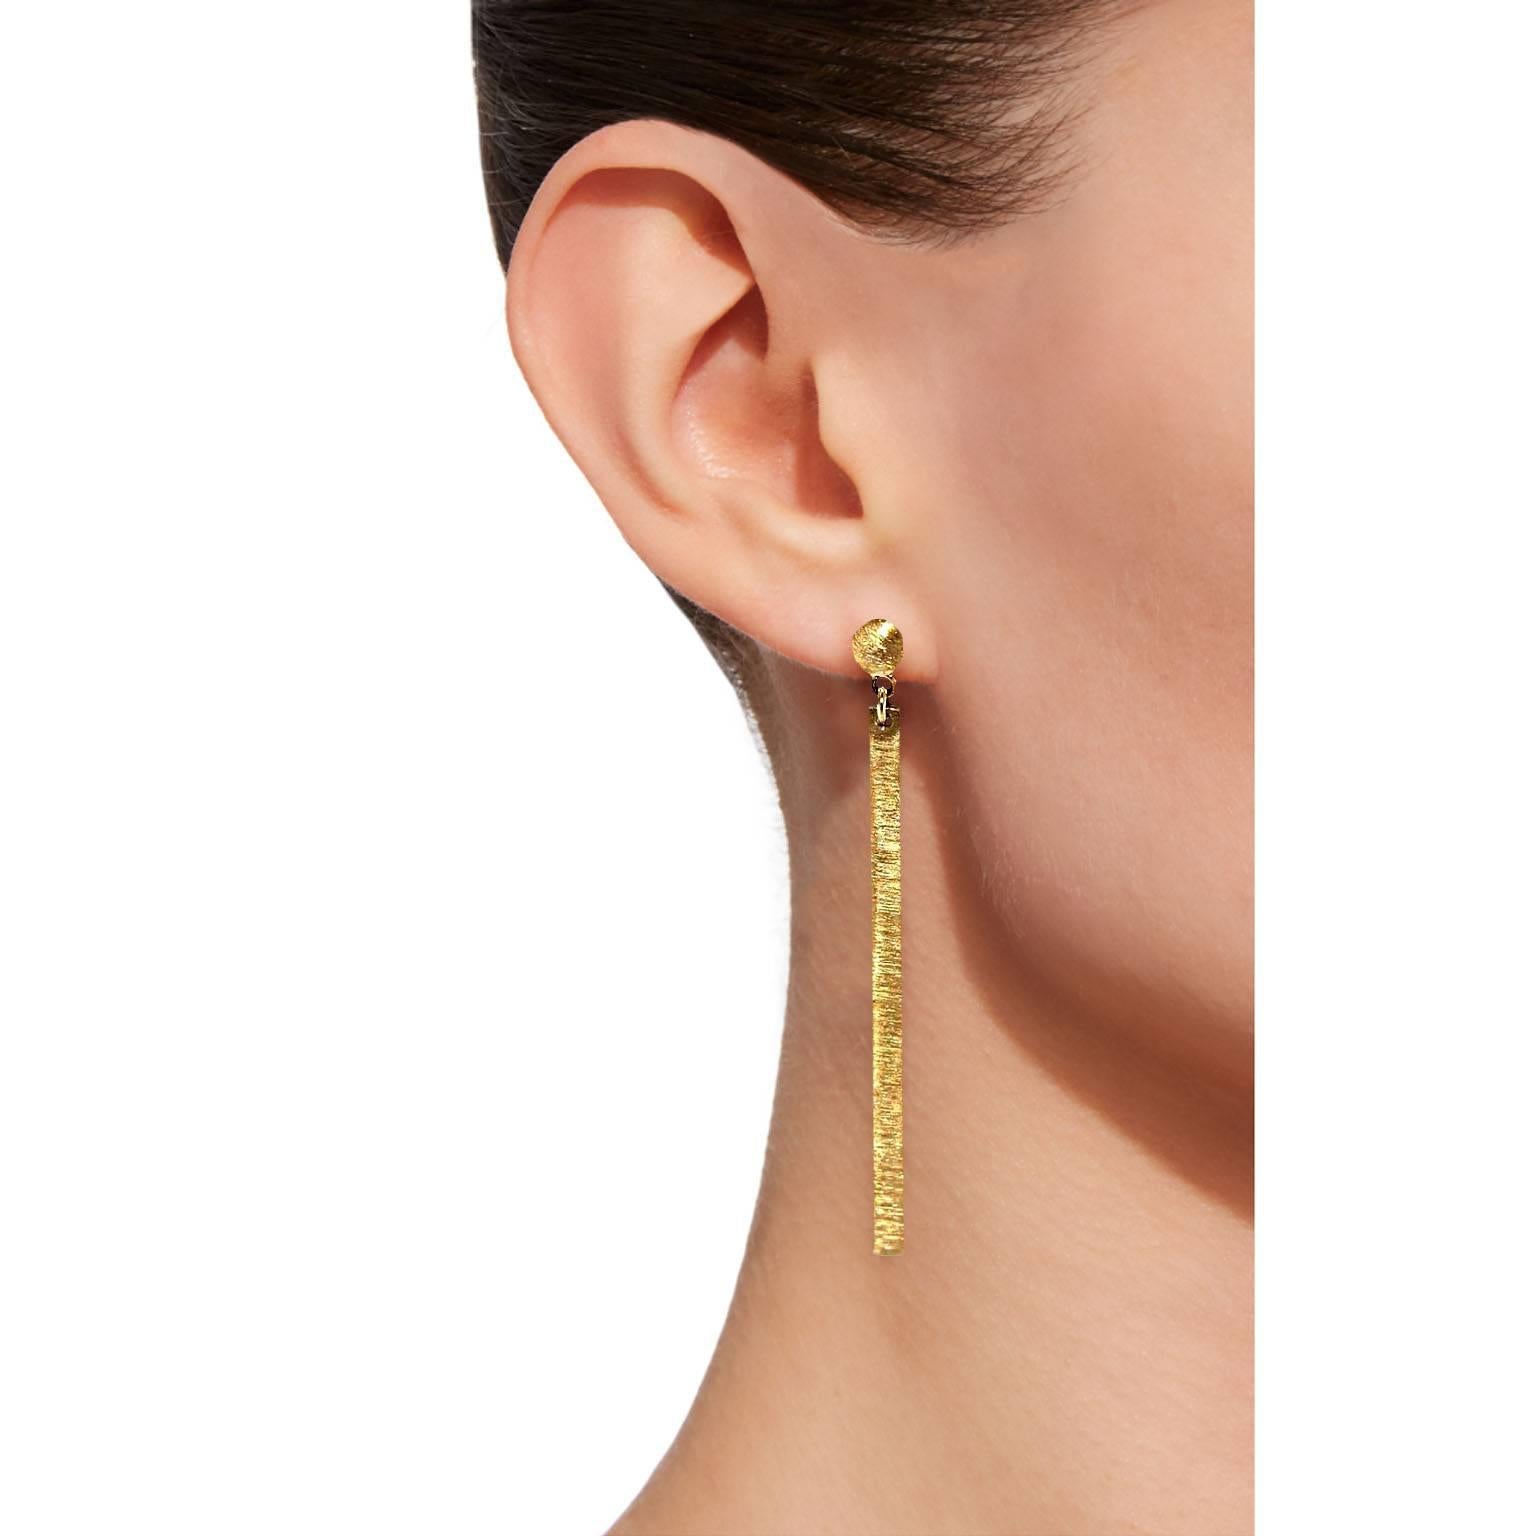 Alex Jona design collection, hand crafted in Italy, 18 karat brushed yellow gold dangling bar ear pendants. 

Alex Jona jewels stand out, not only for their special design and for the excellent quality of the gemstones, but also for the careful